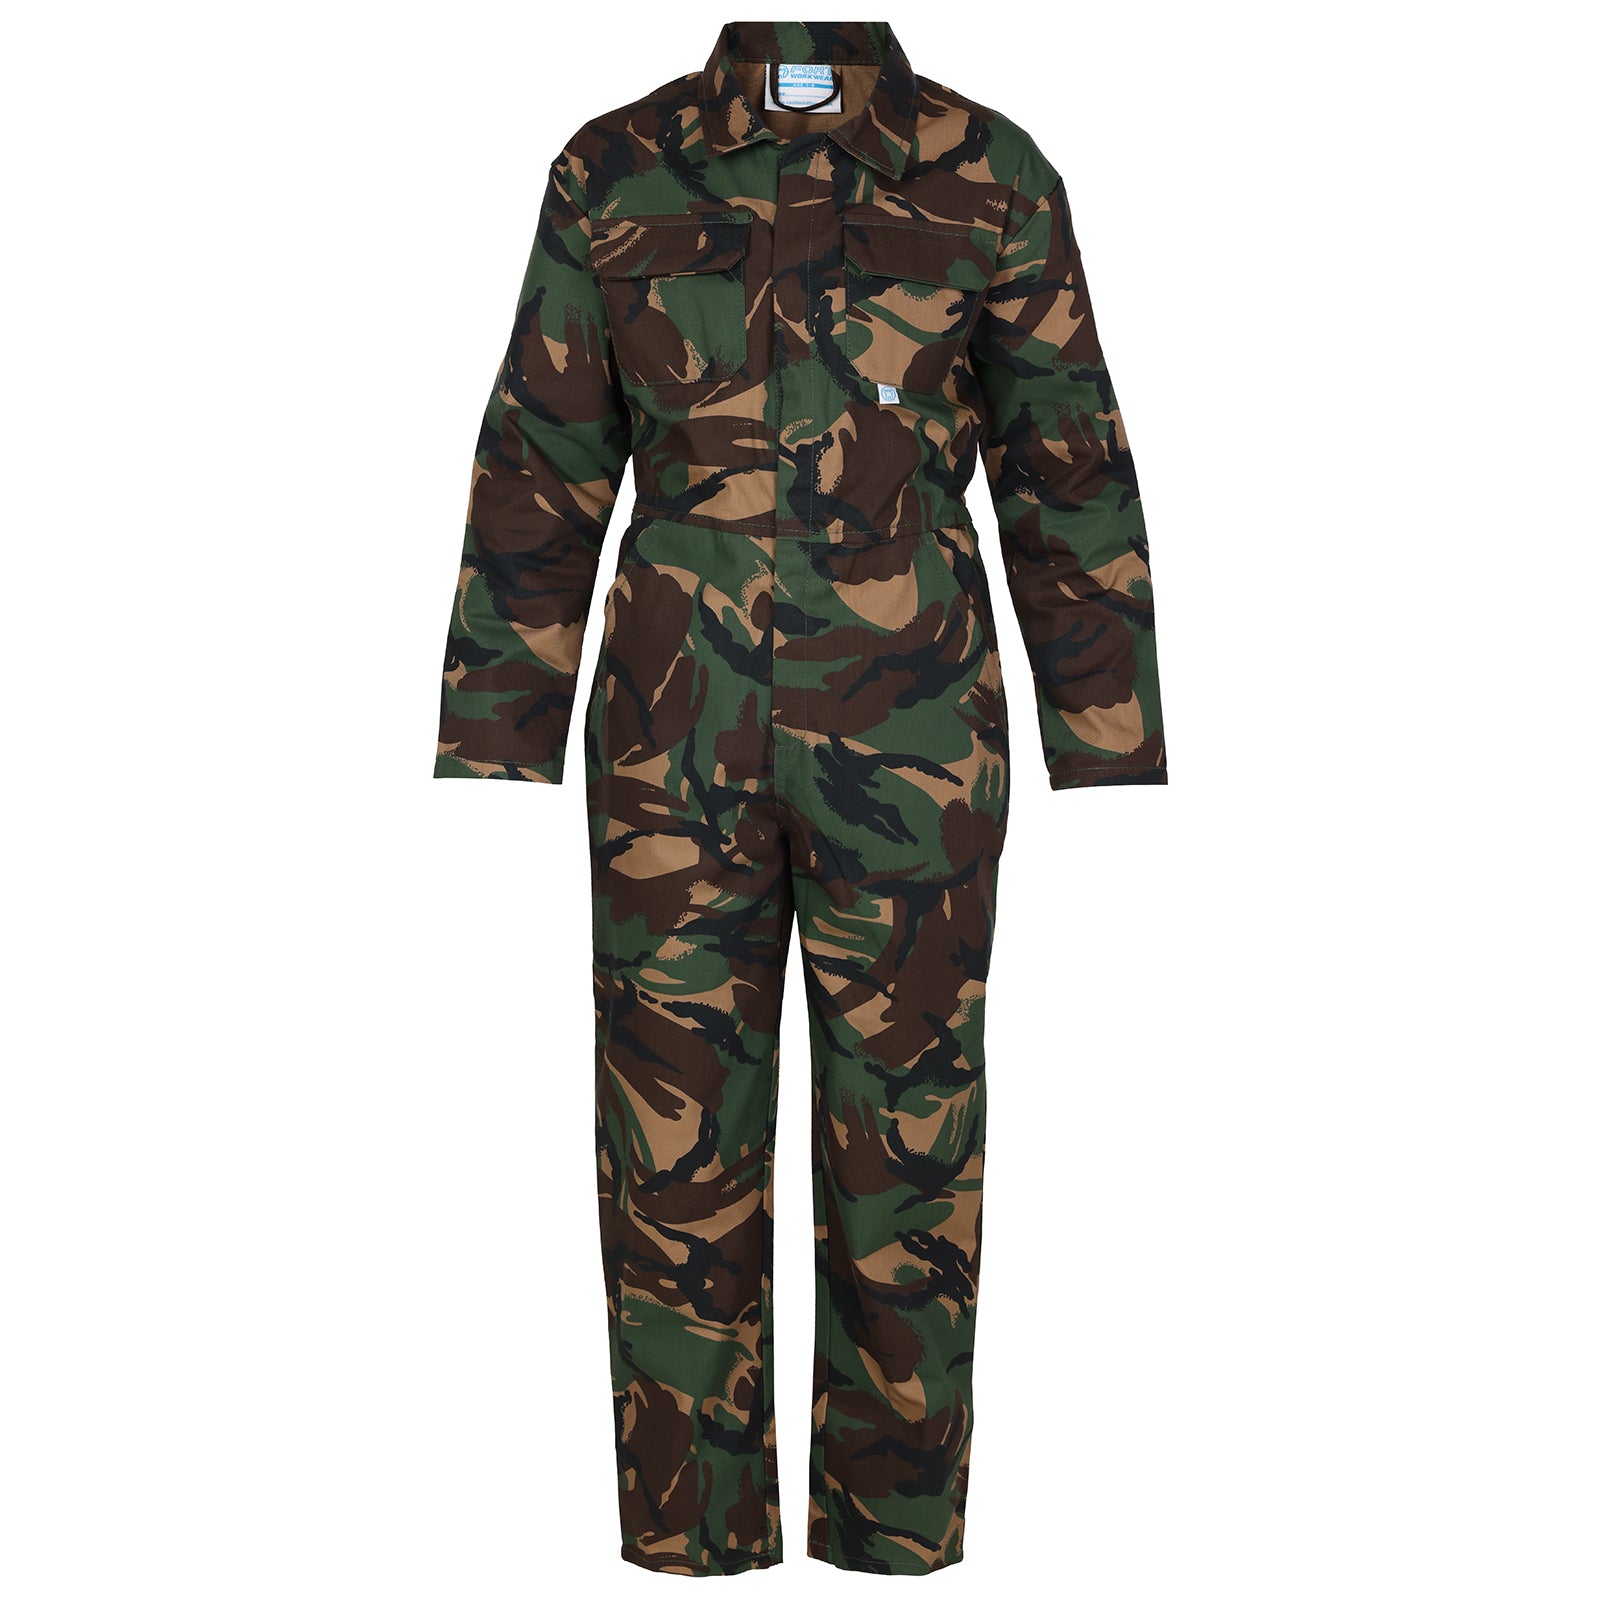 FORT TEARAWAY JUNIOR COVERALL (333)